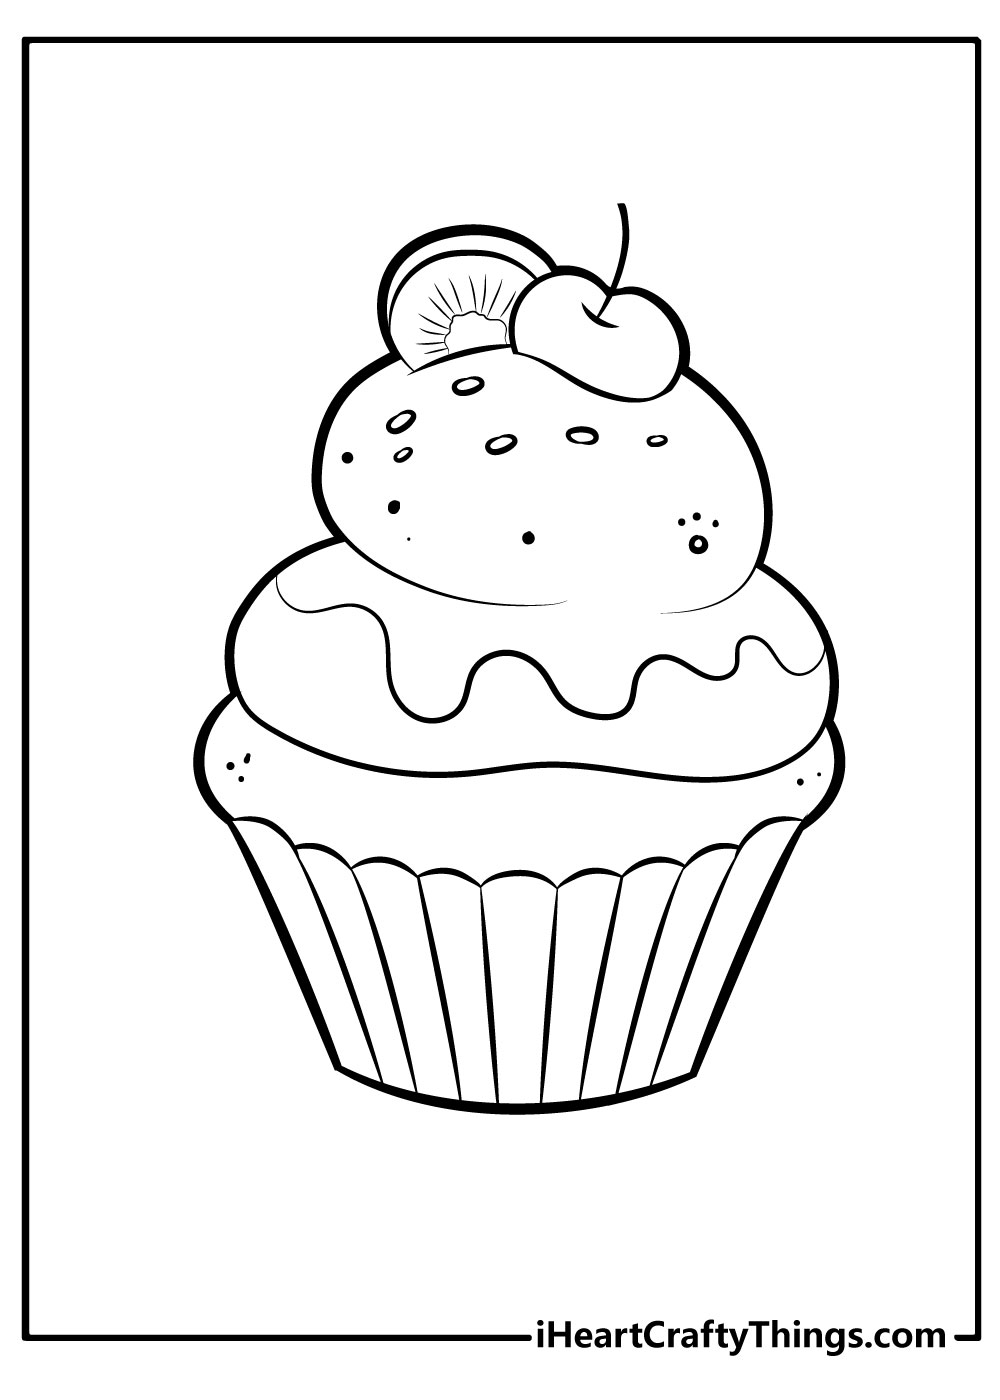 easy Cupcake Coloring Pages free download